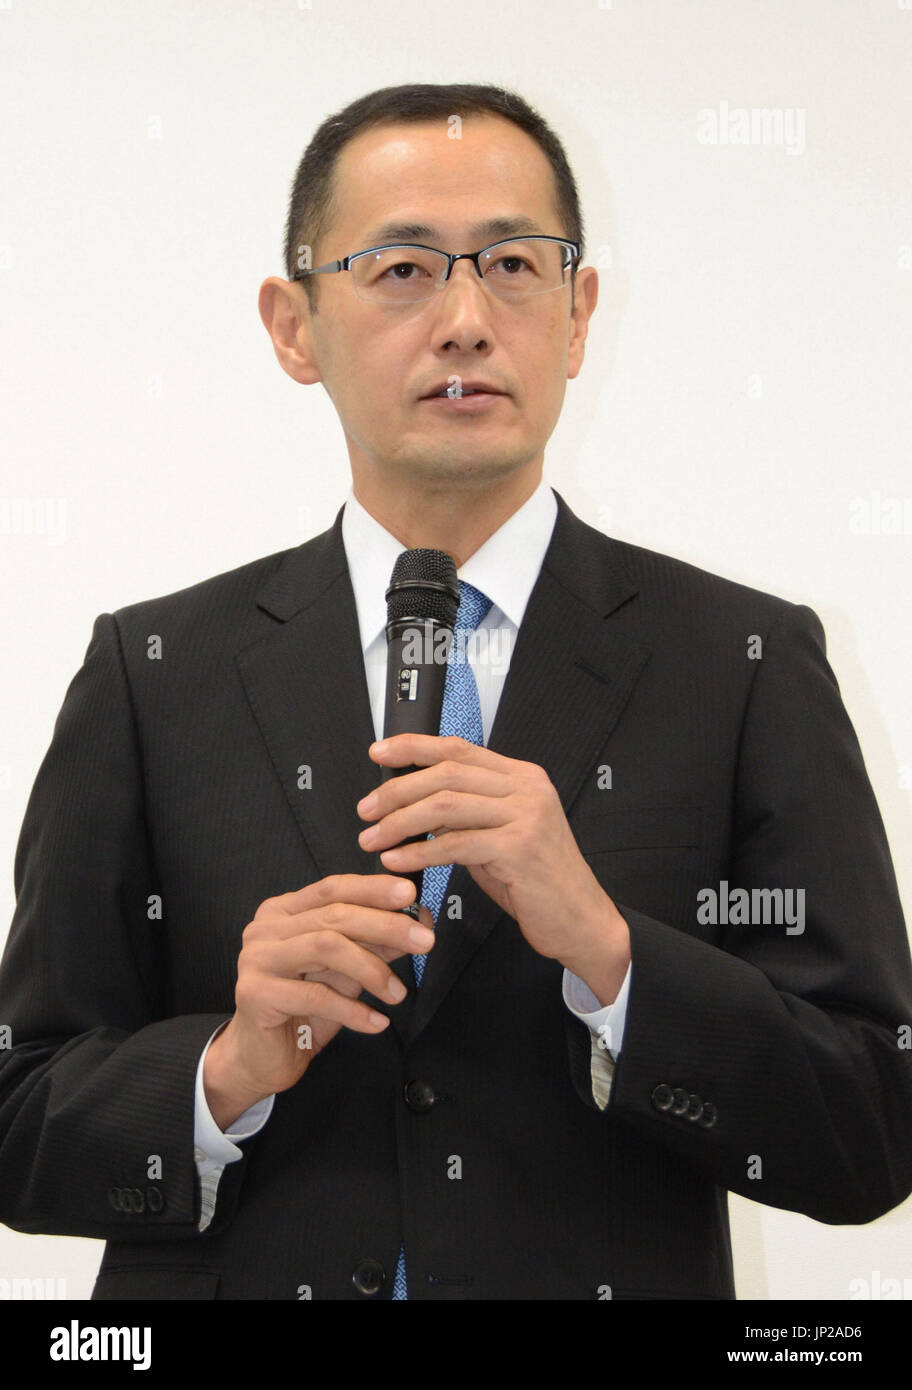 KYOTO, Japan - Shinya Yamanaka, who heads Kyoto University's Center for iPS Cell Research and Application, holds a press conference at the university in Kyoto on March 1, 2014, following revelations that the university's laboratory conducting experiments on induced pluripotent stem cells has been warned by the science ministry about its careless control of genetically engineered mice. (Kyodo) Stock Photo